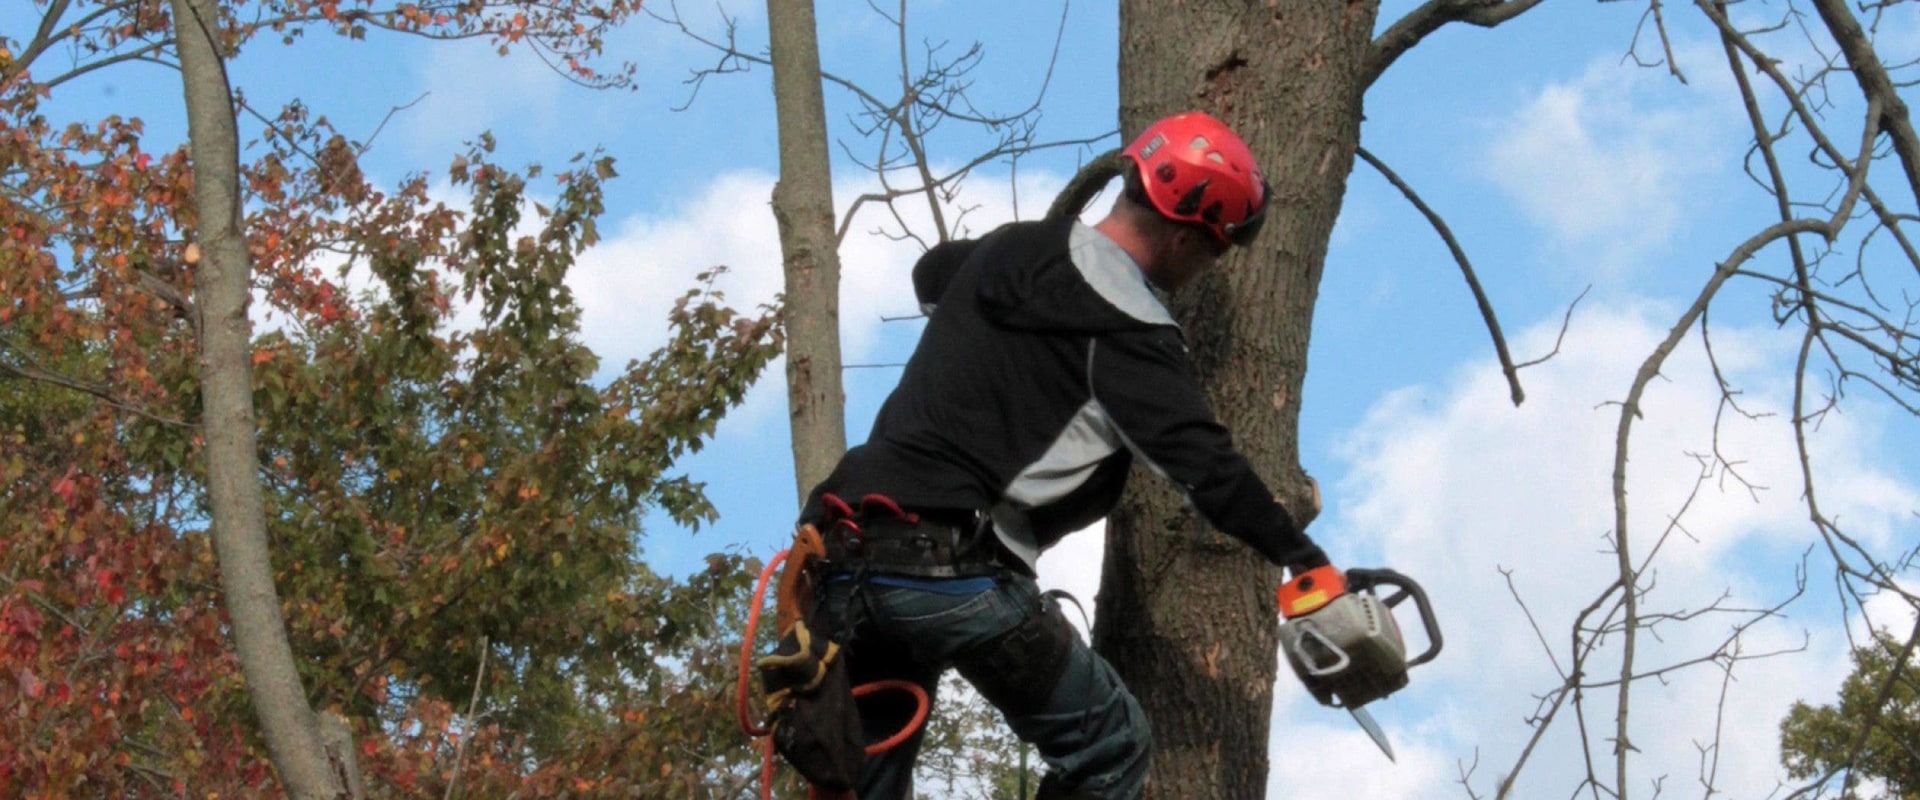 What are the duties of an arborist?